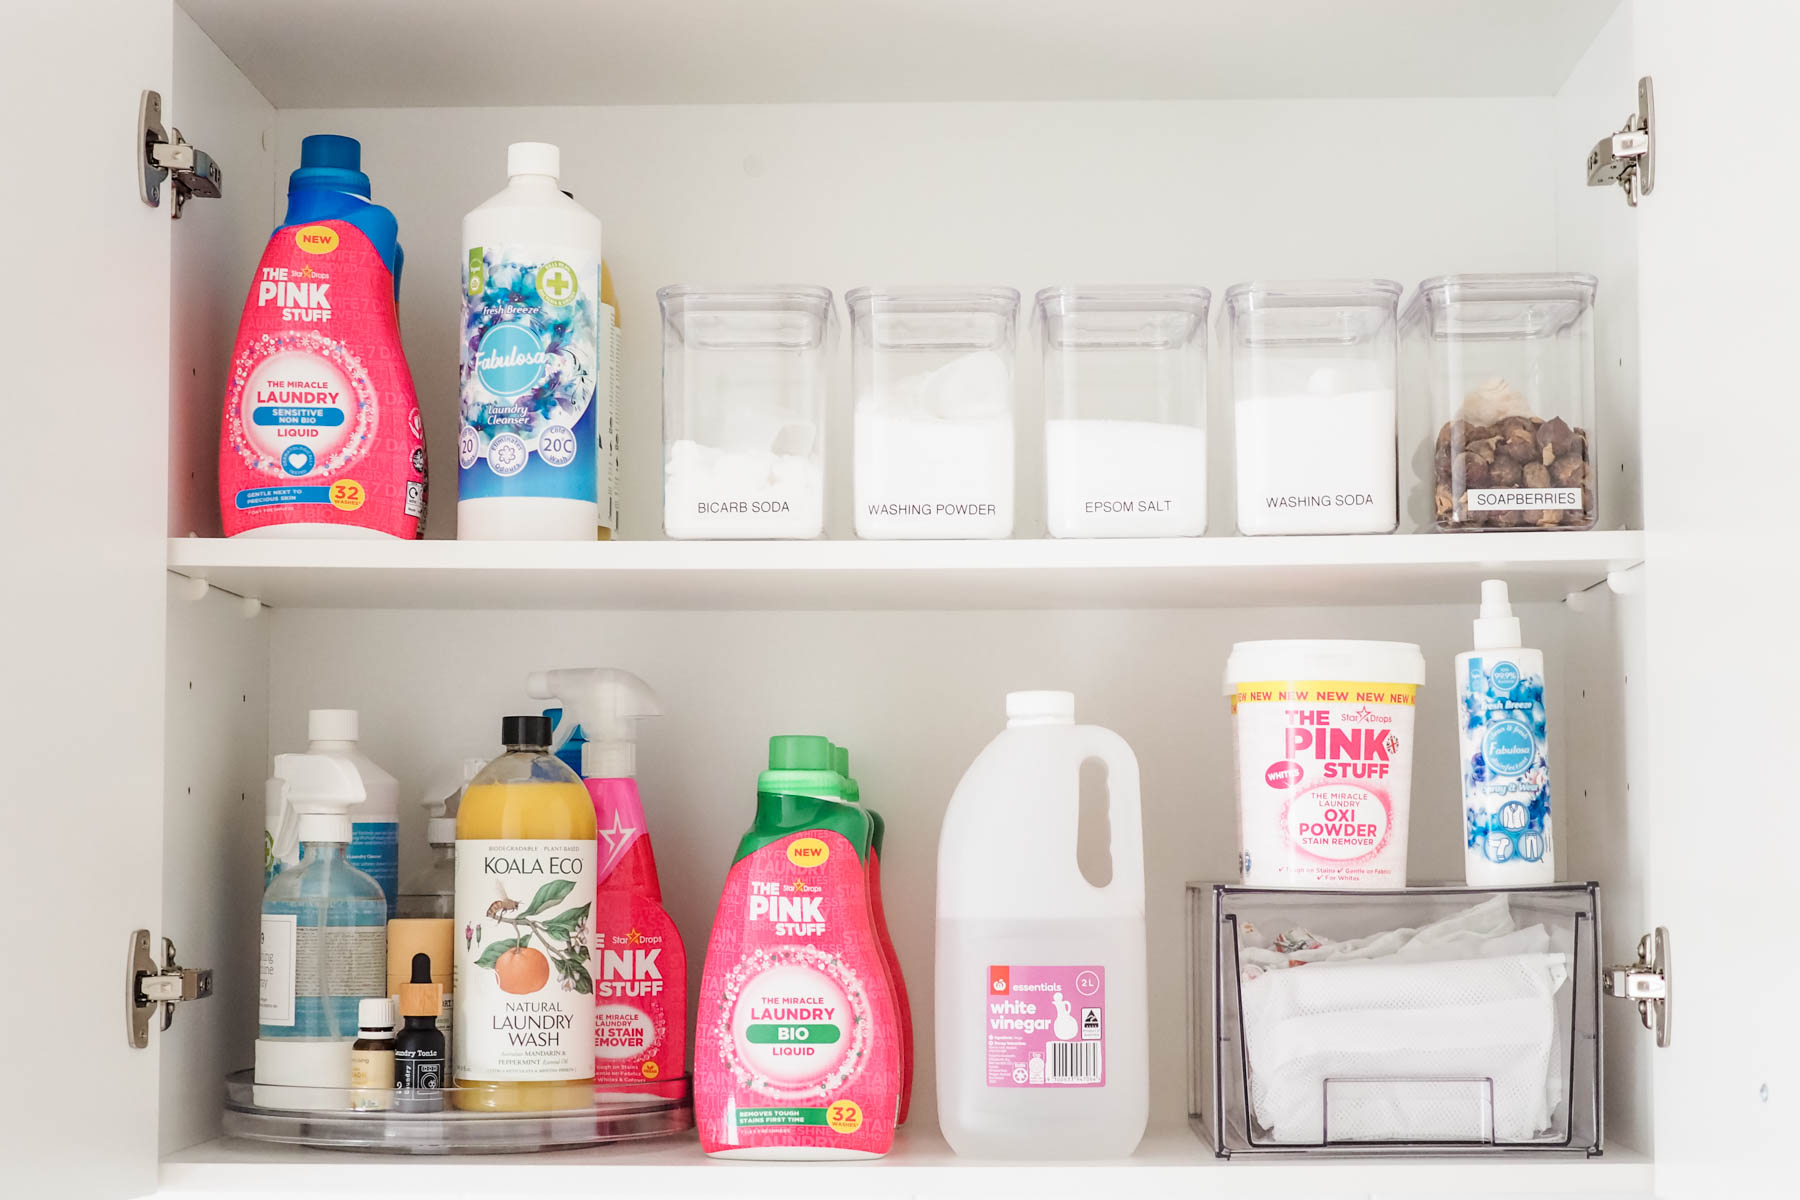 How to organise your medicine cabinet - The Organised Housewife